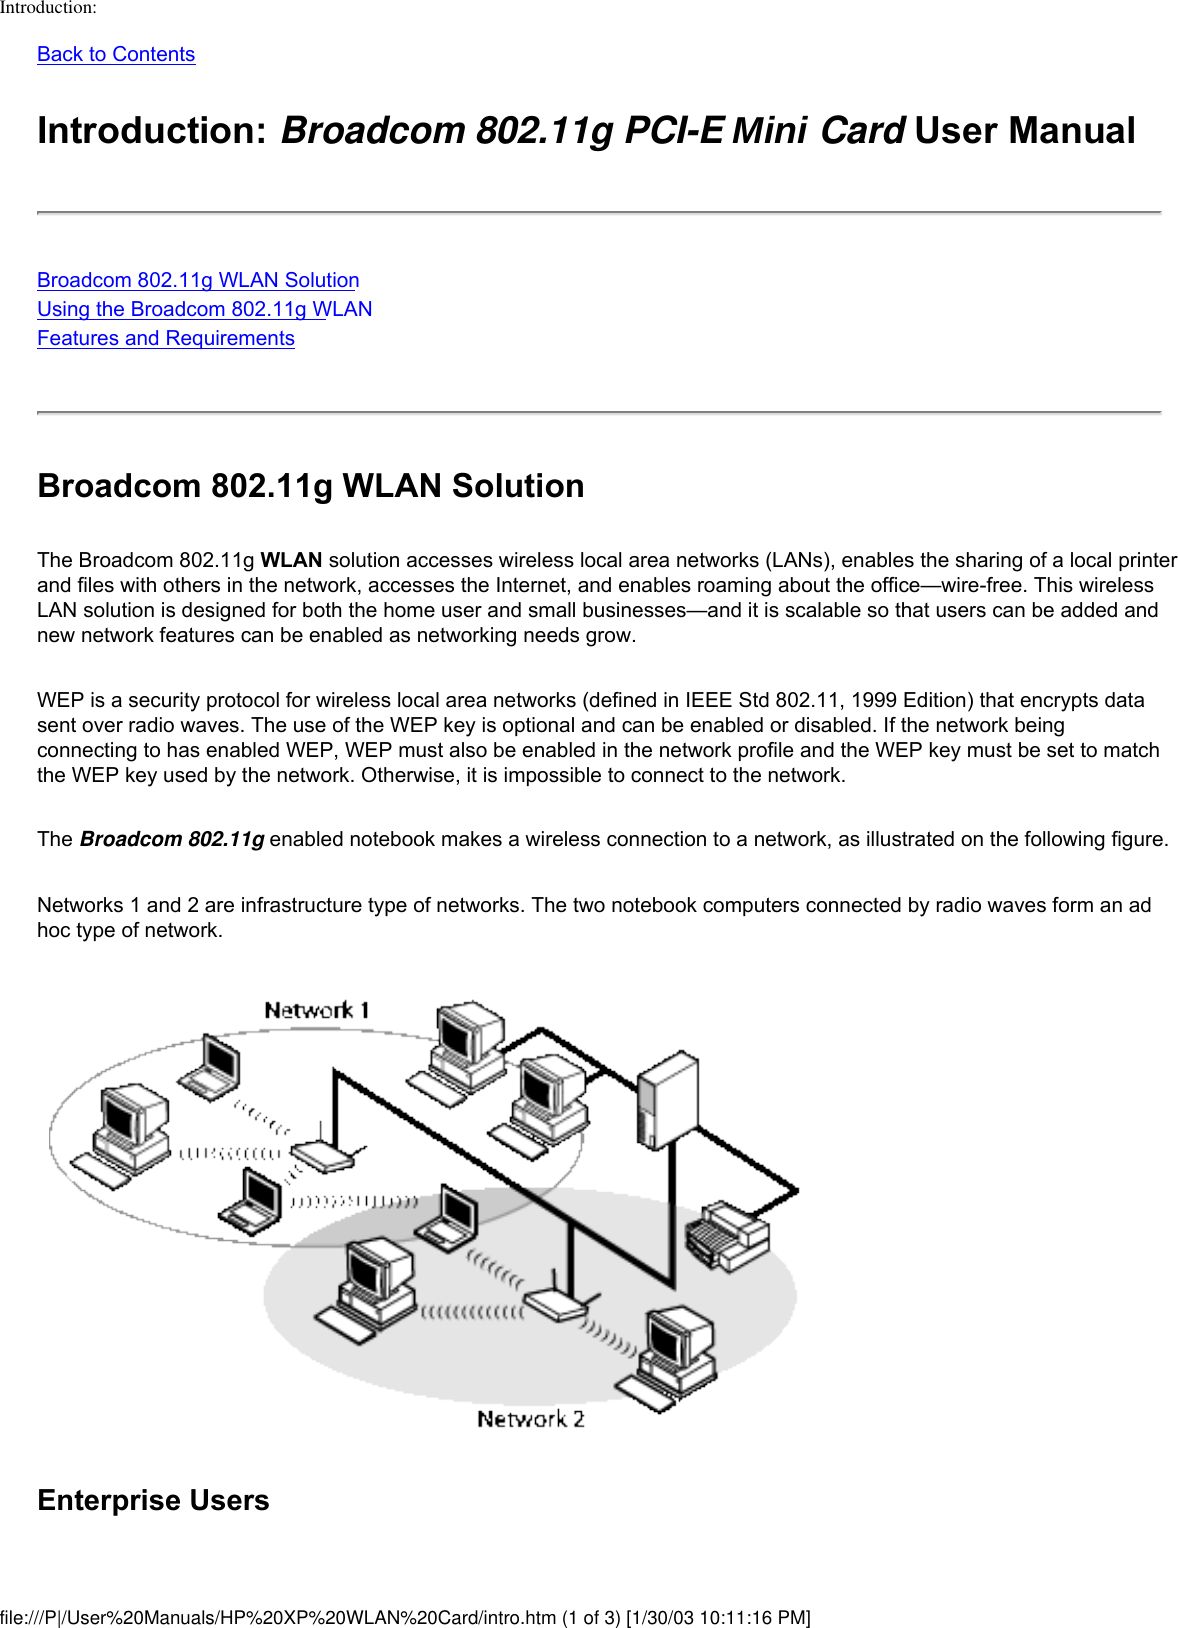 Introduction: Back to ContentsIntroduction: Broadcom 802.11g PCI-E Mini Card User ManualBroadcom 802.11g WLAN SolutionUsing the Broadcom 802.11g WLANFeatures and RequirementsBroadcom 802.11g WLAN SolutionThe Broadcom 802.11g WLAN solution accesses wireless local area networks (LANs), enables the sharing of a local printer and files with others in the network, accesses the Internet, and enables roaming about the office—wire-free. This wireless LAN solution is designed for both the home user and small businesses—and it is scalable so that users can be added and new network features can be enabled as networking needs grow.WEP is a security protocol for wireless local area networks (defined in IEEE Std 802.11, 1999 Edition) that encrypts data sent over radio waves. The use of the WEP key is optional and can be enabled or disabled. If the network being connecting to has enabled WEP, WEP must also be enabled in the network profile and the WEP key must be set to match the WEP key used by the network. Otherwise, it is impossible to connect to the network.The Broadcom 802.11g enabled notebook makes a wireless connection to a network, as illustrated on the following figure.Networks 1 and 2 are infrastructure type of networks. The two notebook computers connected by radio waves form an ad hoc type of network.Enterprise Usersfile:///P|/User%20Manuals/HP%20XP%20WLAN%20Card/intro.htm (1 of 3) [1/30/03 10:11:16 PM]